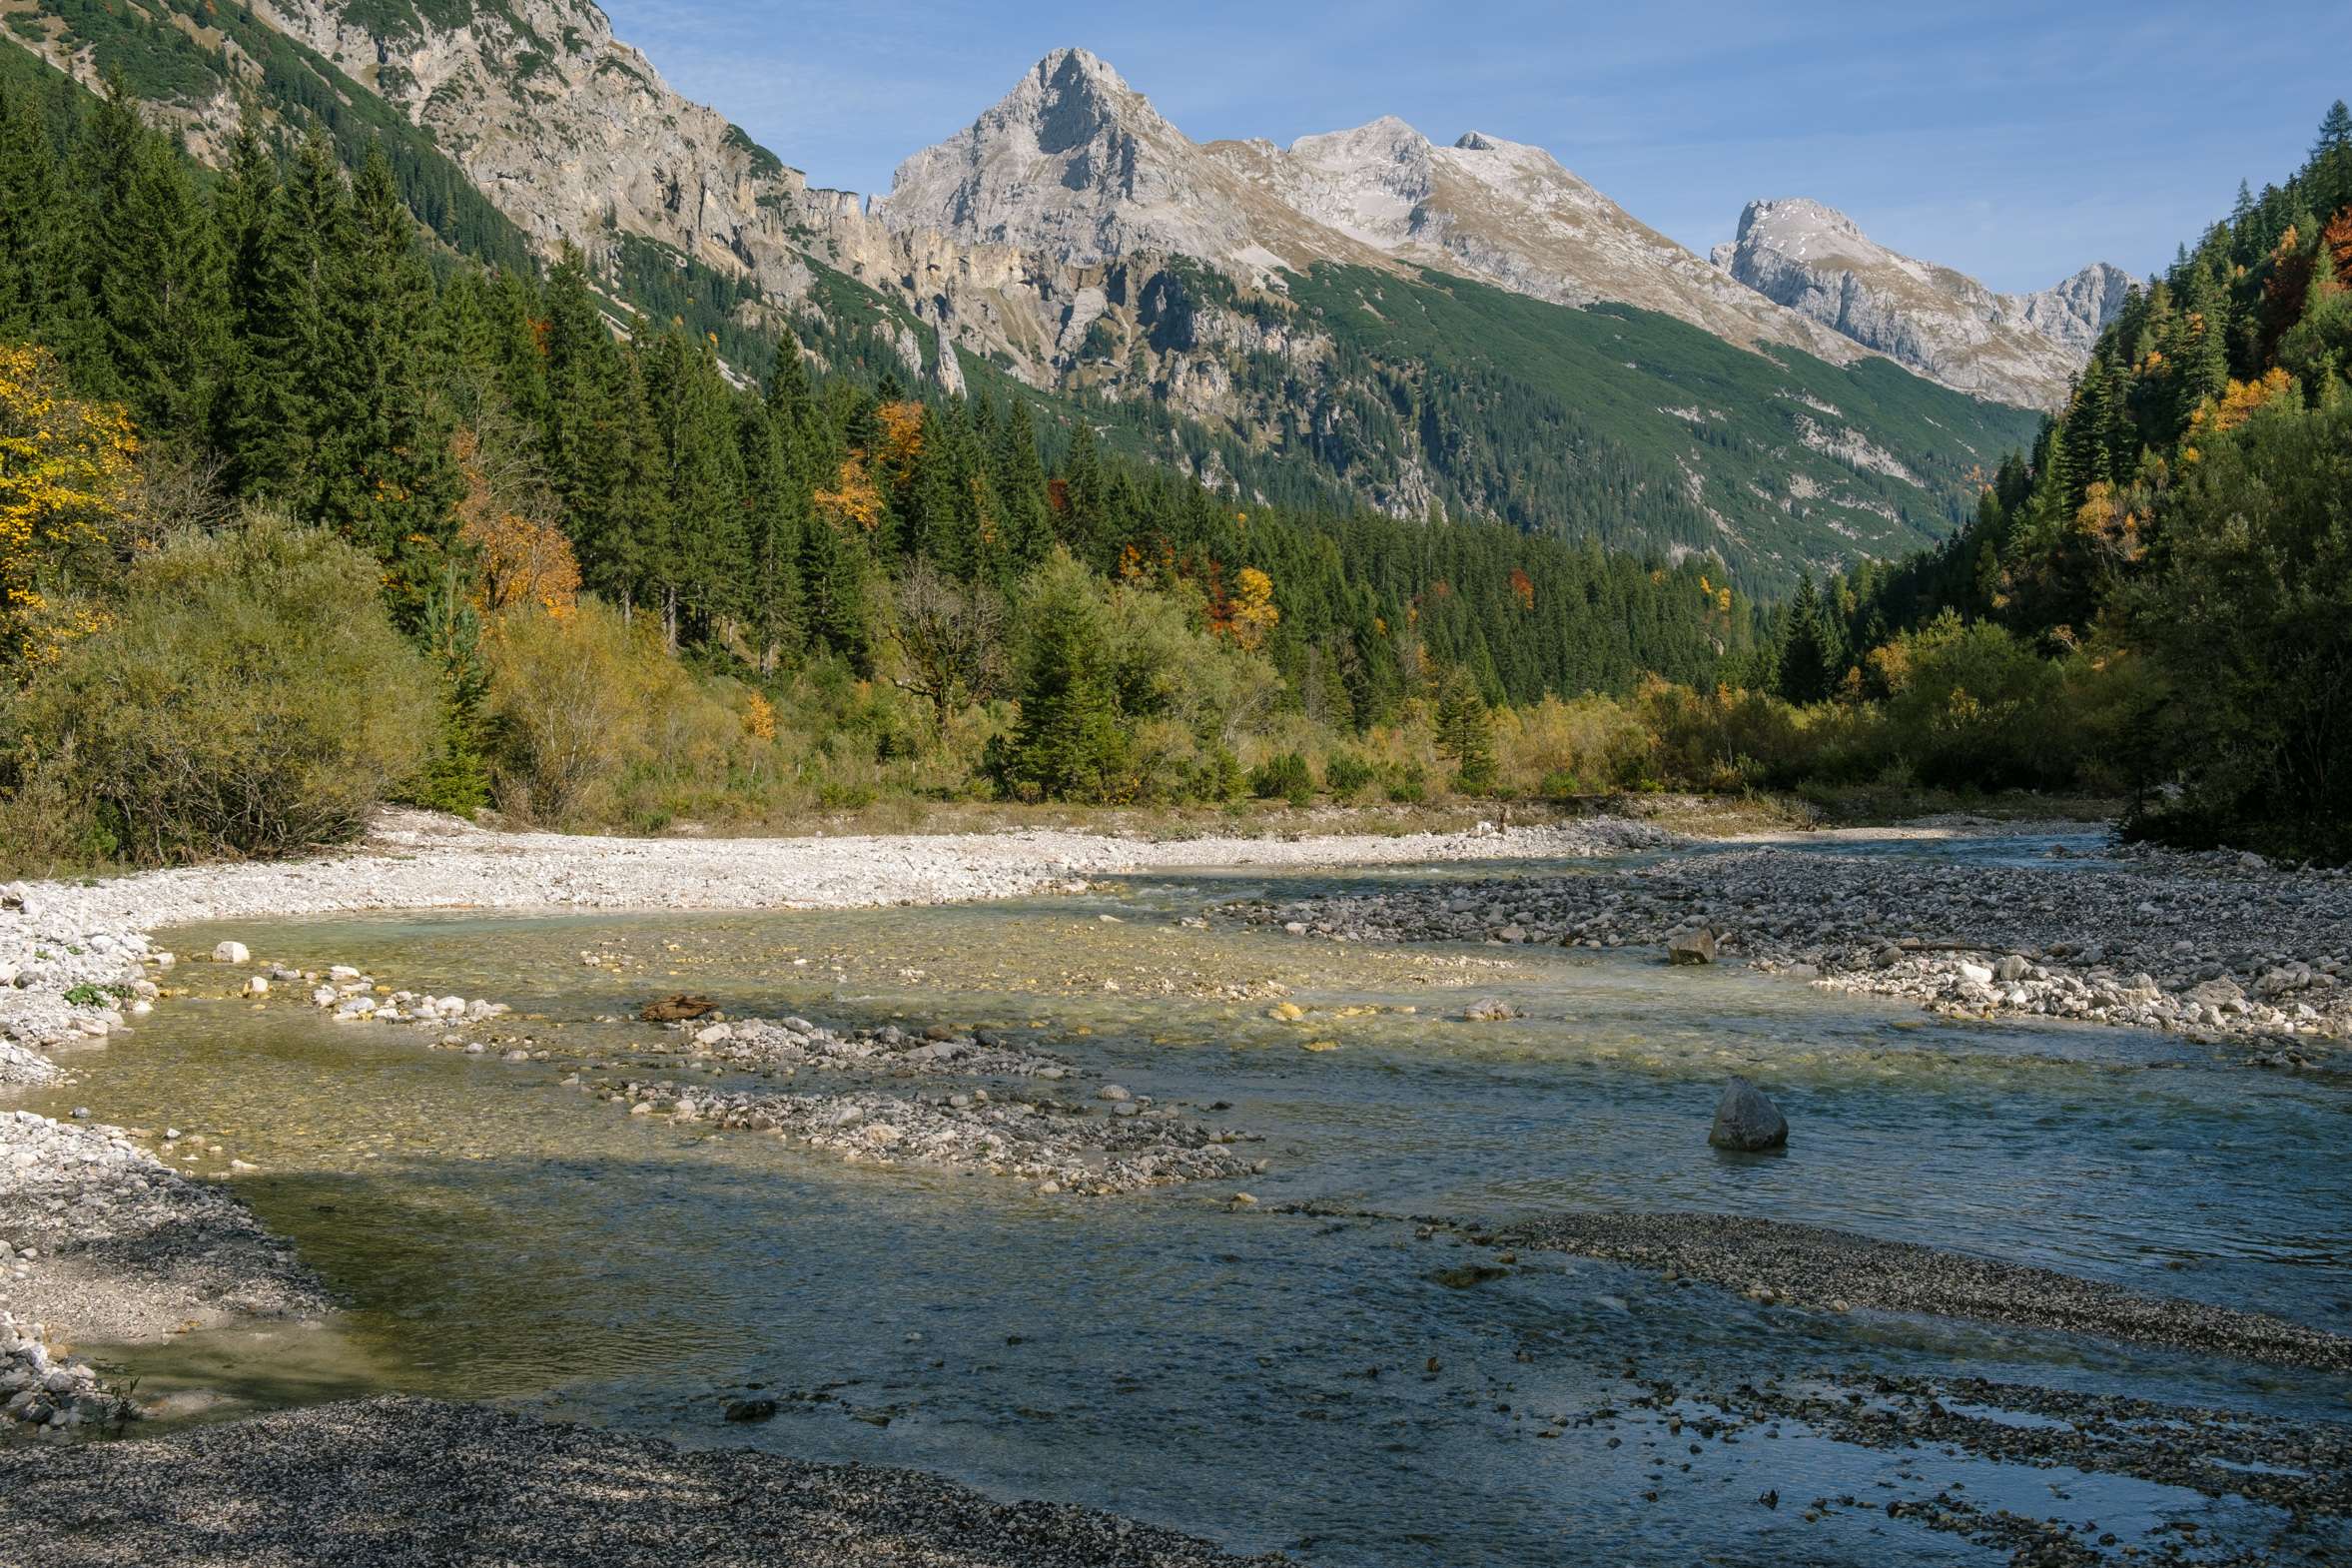 The river shallows and widens engulfing the valley in the Karwendel mountains